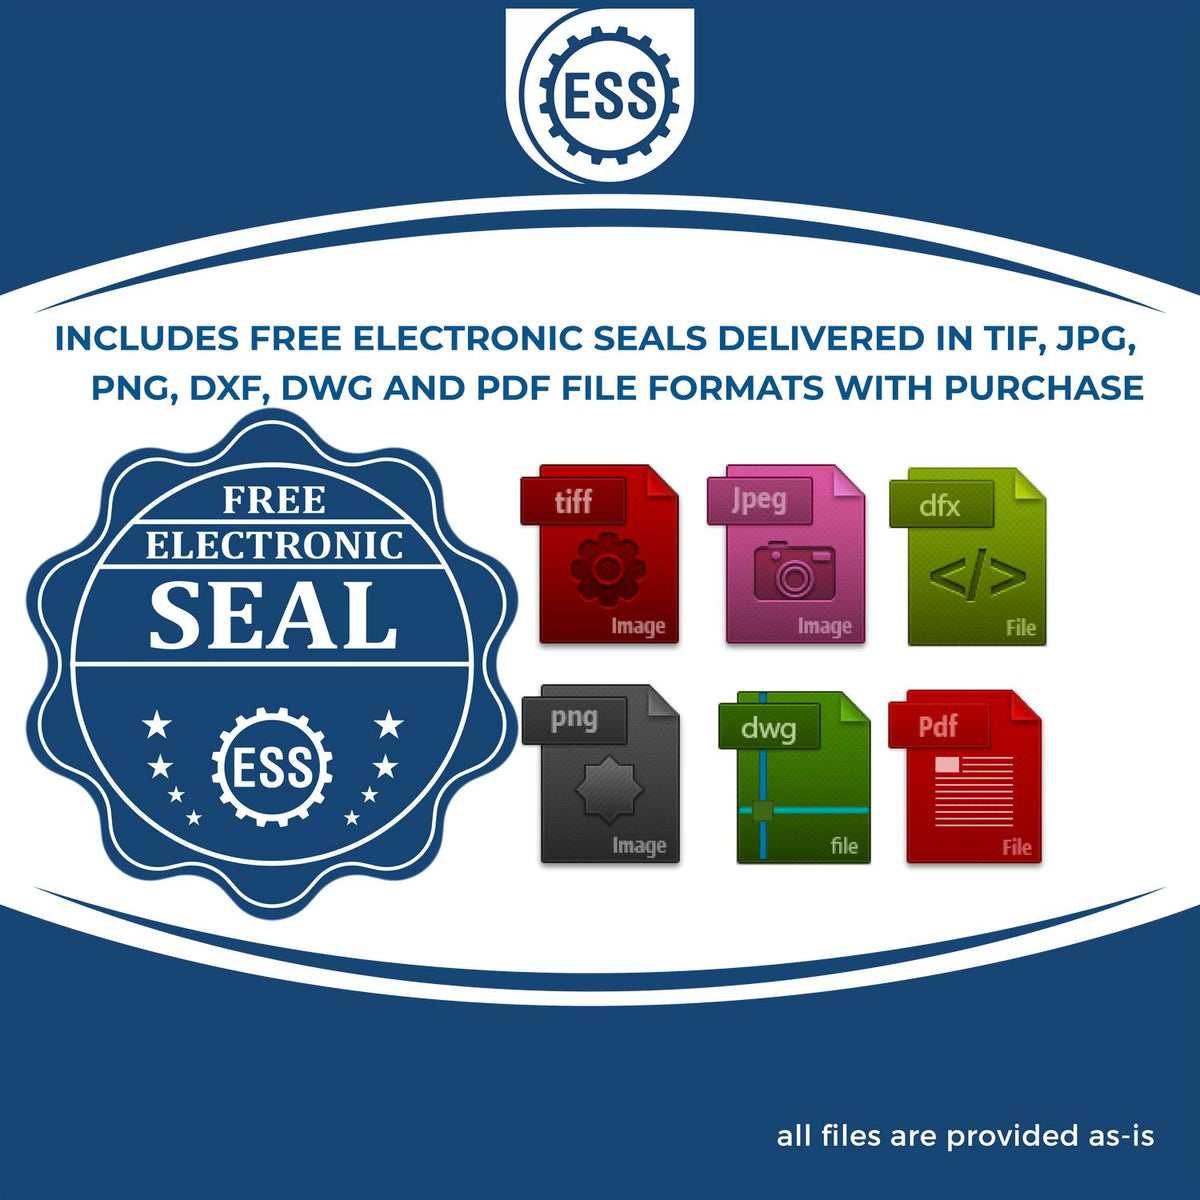 An infographic for the free electronic seal for the Slim Pre-Inked Tennessee Landscape Architect Seal Stamp illustrating the different file type icons such as DXF, DWG, TIF, JPG and PNG.